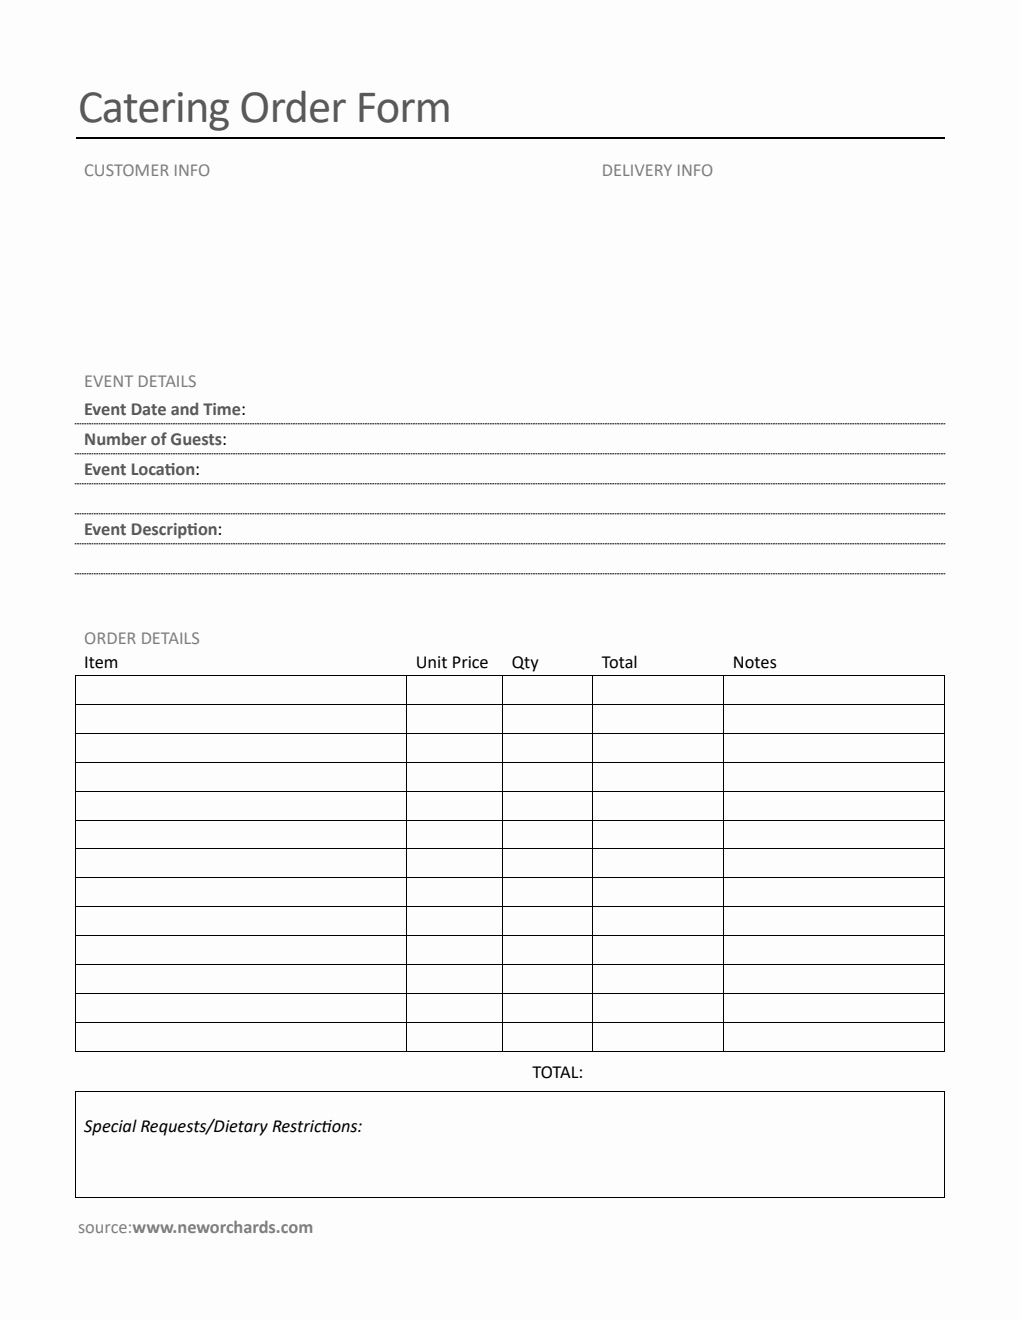 Printable Catering Order Form Template in PDF